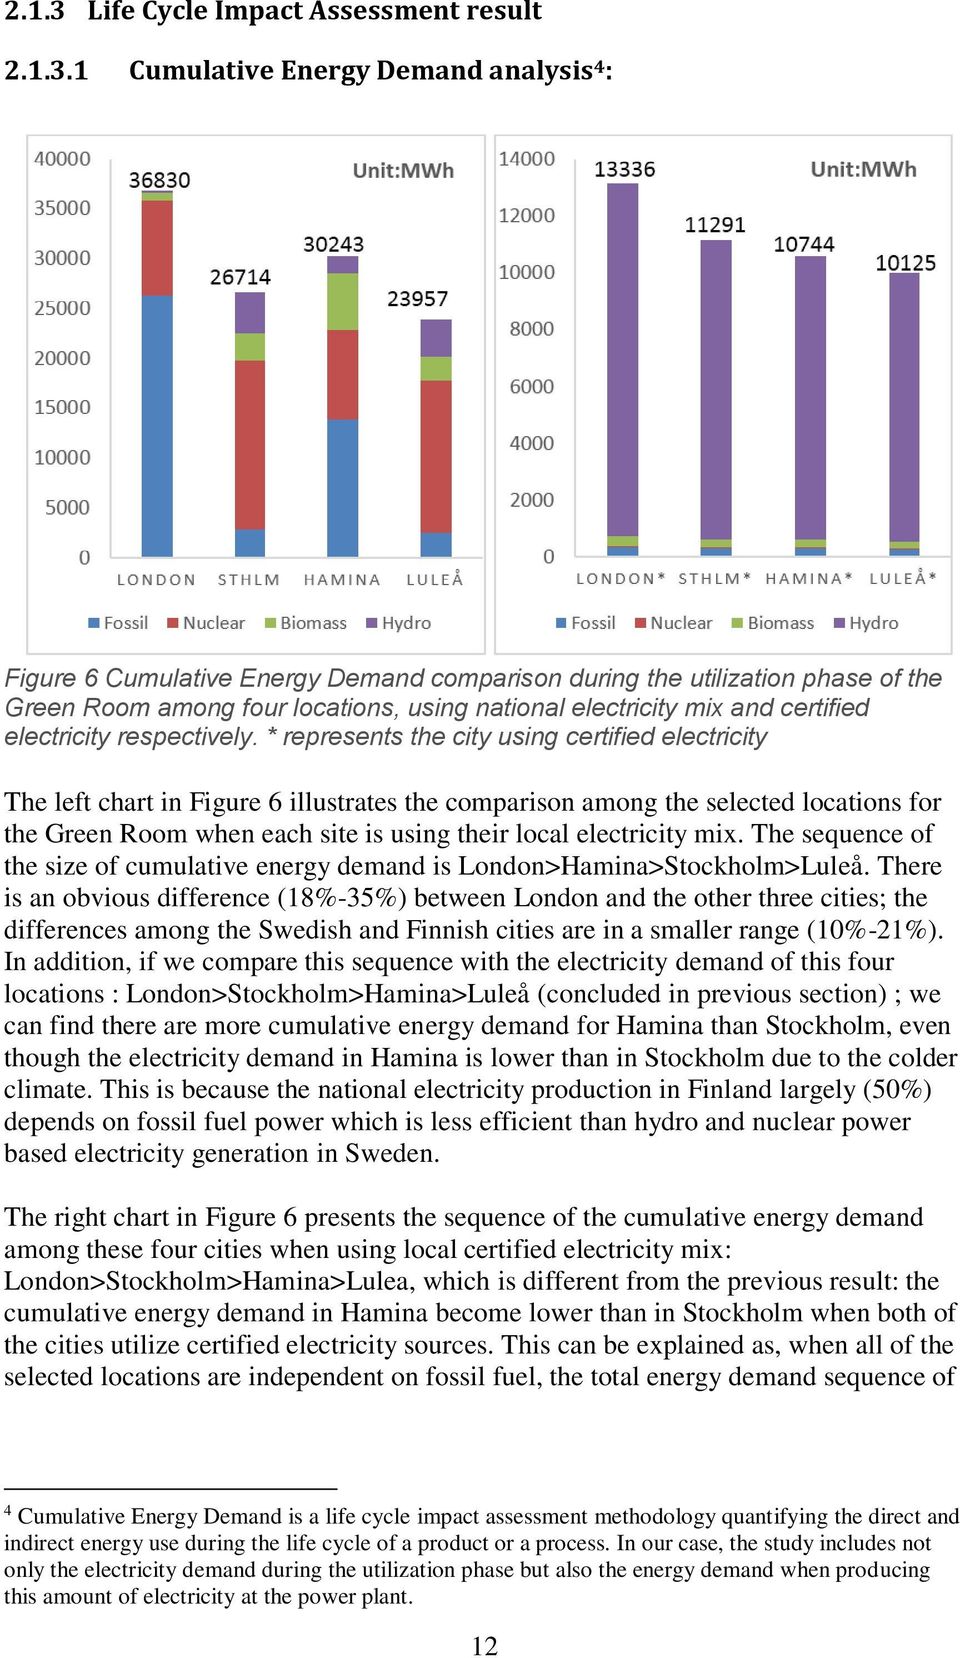 1 Cumulative Energy Demand analysis 4 : Figure 6 Cumulative Energy Demand comparison during the utilization phase of the Green Room among four locations, using national electricity mix and certified